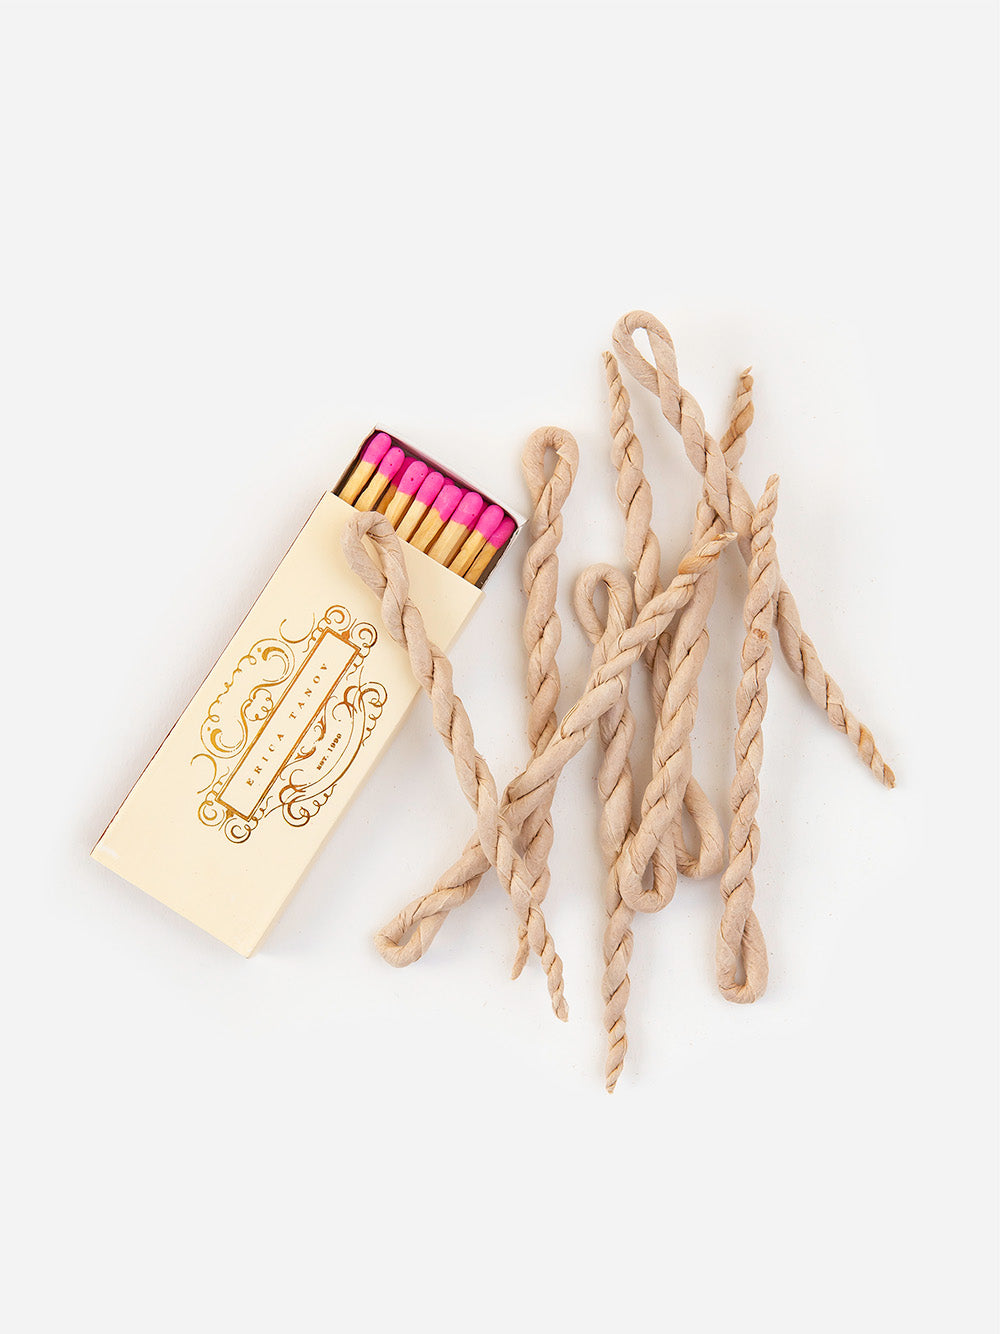 Cedar Rope Incense With Matches